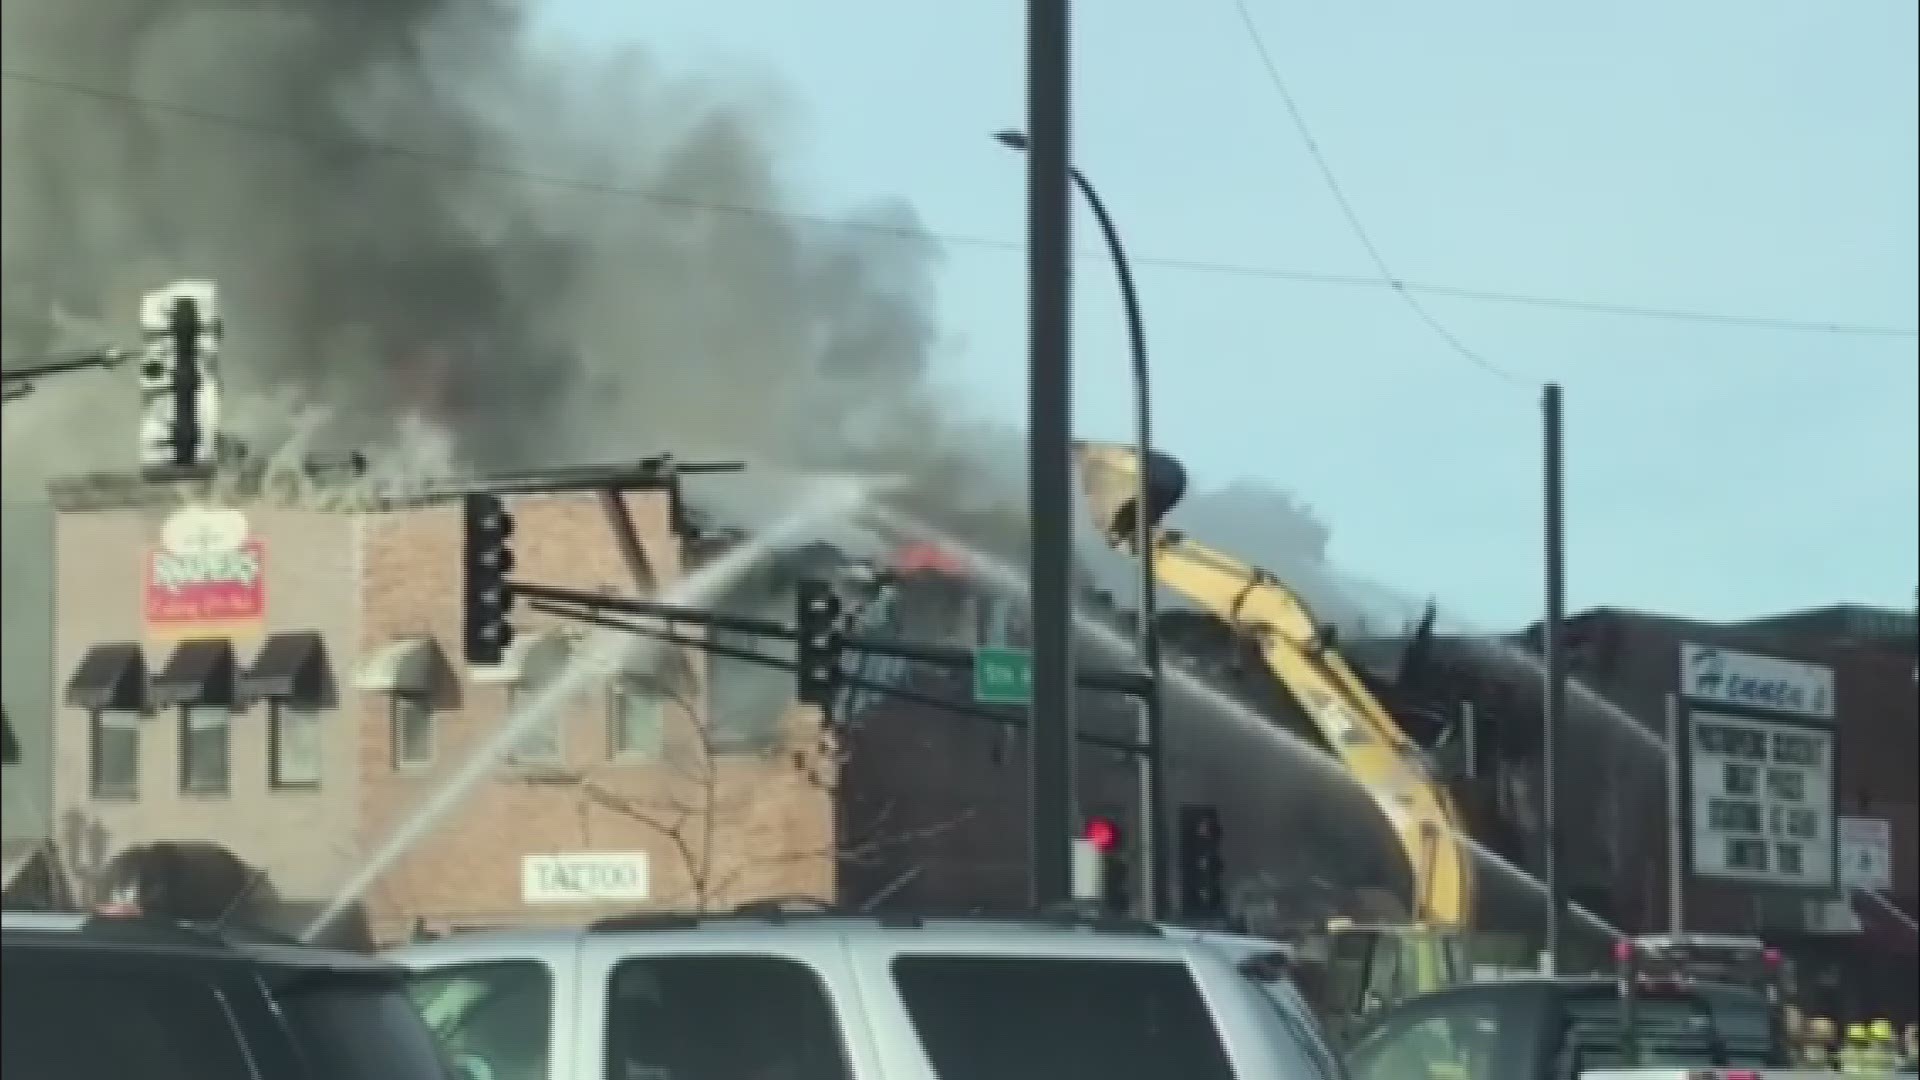 More than 100 firefighters were dispatched to the old downtown section of Alexandria, Minnesota after a number of businesses were reported on fire.